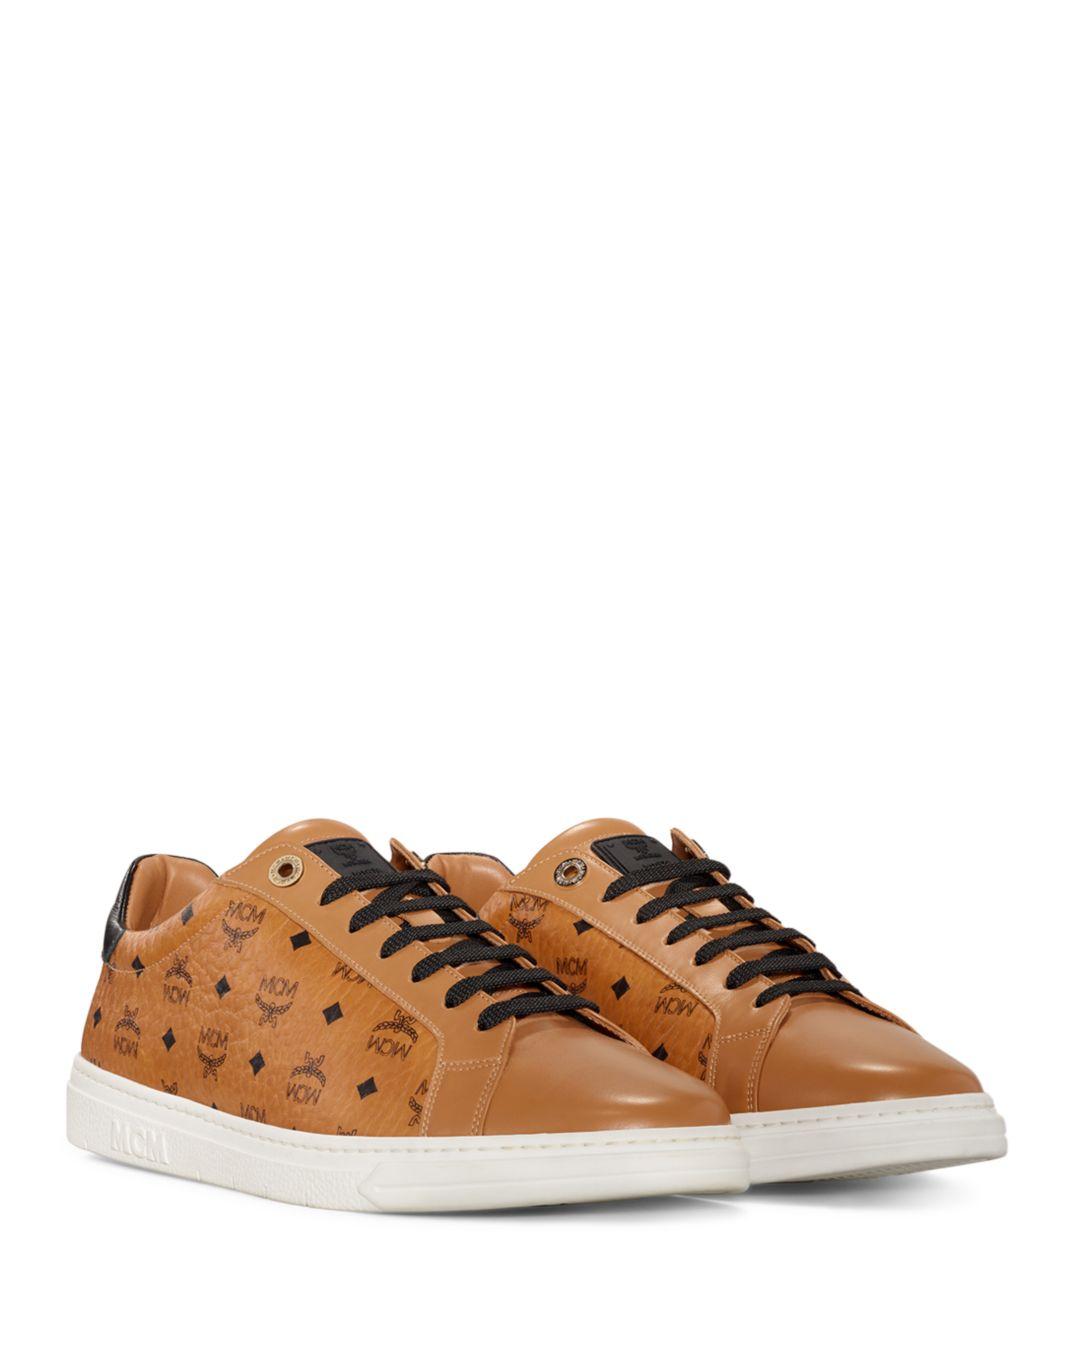 MCM Leather Women's New Court Lace Up Sneakers in Cognac (Brown) - Lyst